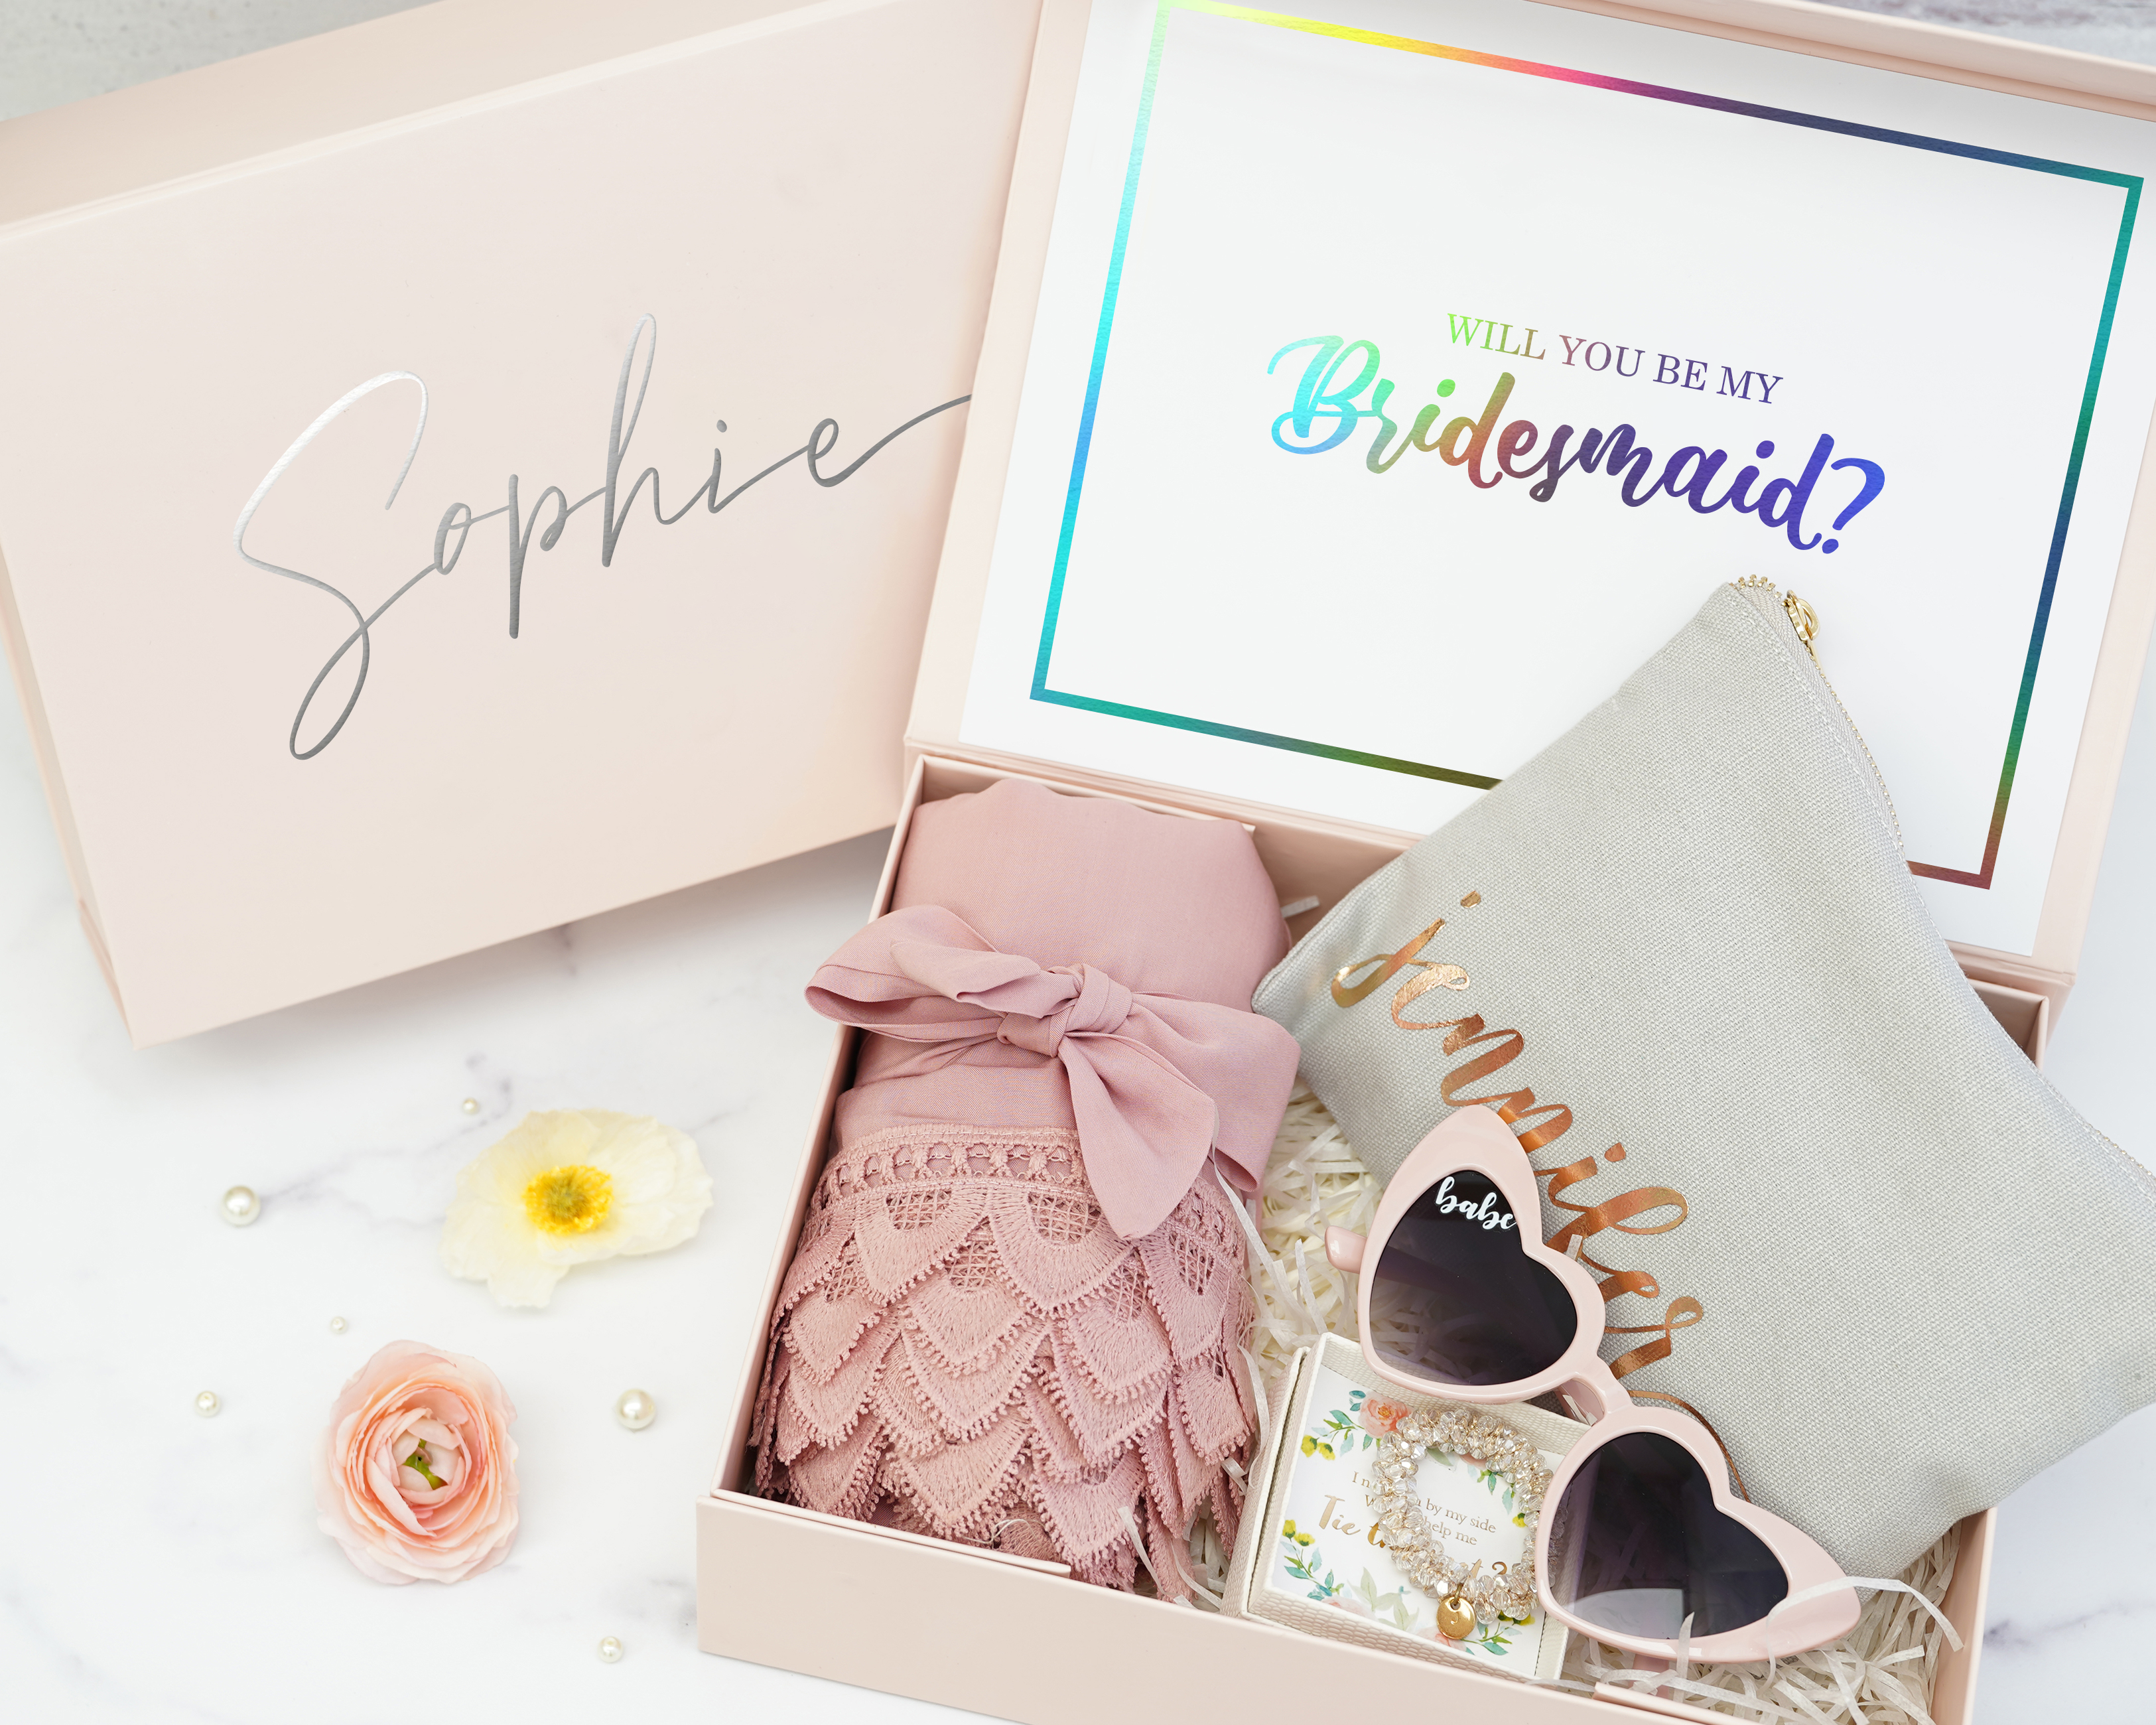 Blush Personalized Bridesmaid Proposal Box with customized gifts , included name, message card, robe, makeup bag, sunglasses.